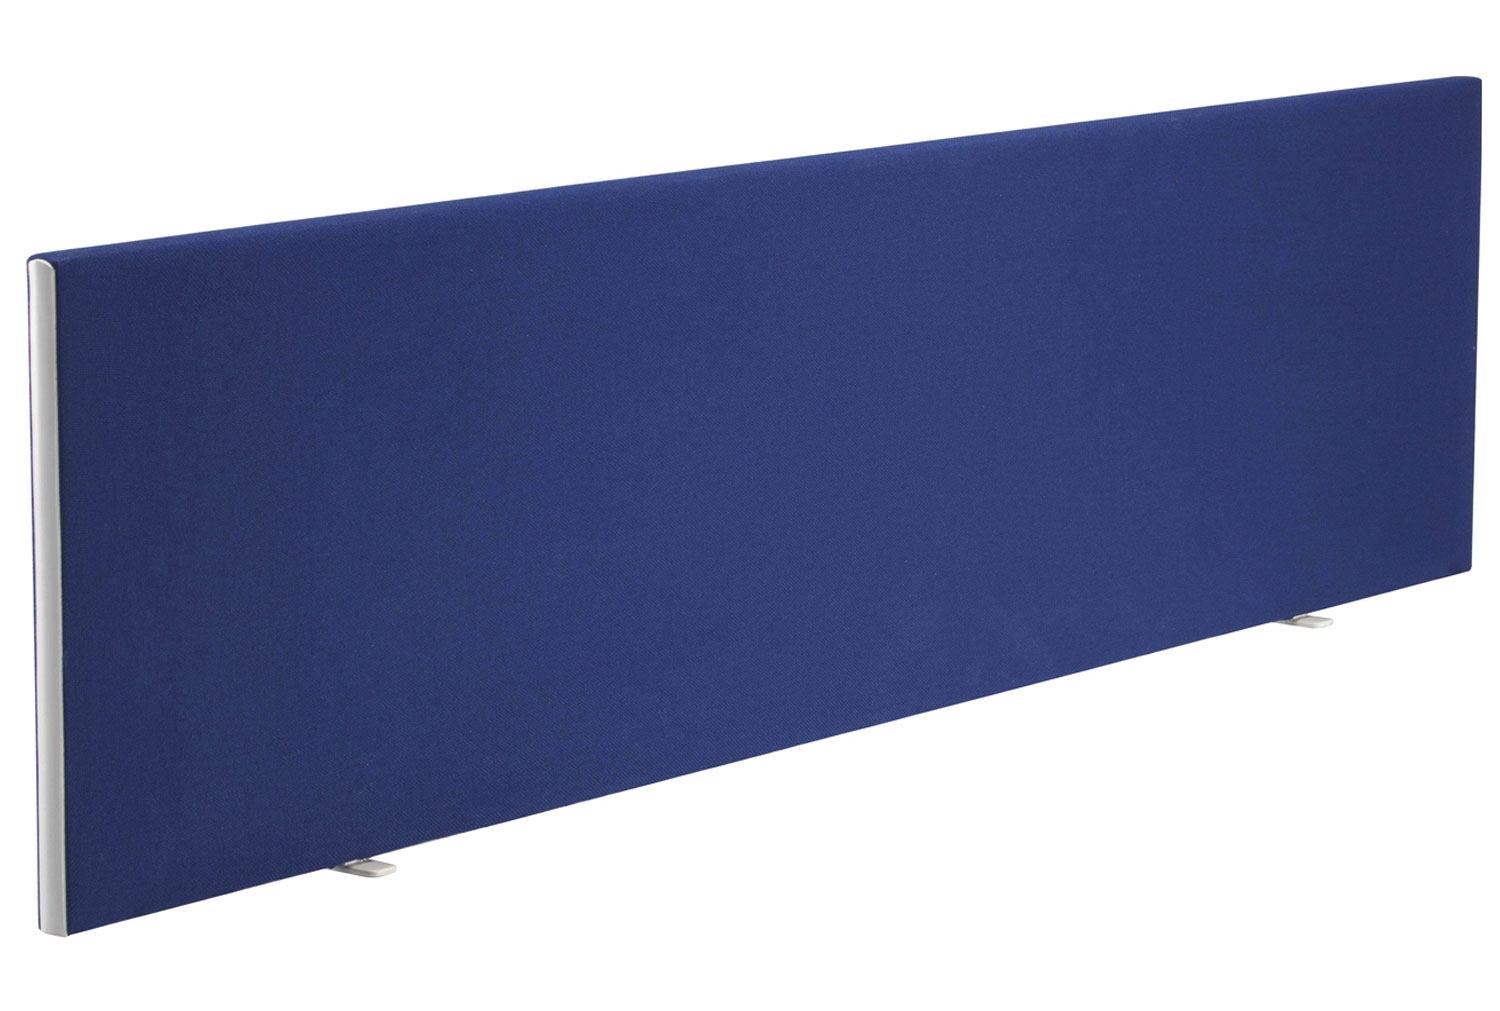 Whist Economy Rectangular Desktop Office Screens, 160wx40h (cm), Royal Blue, Express Delivery